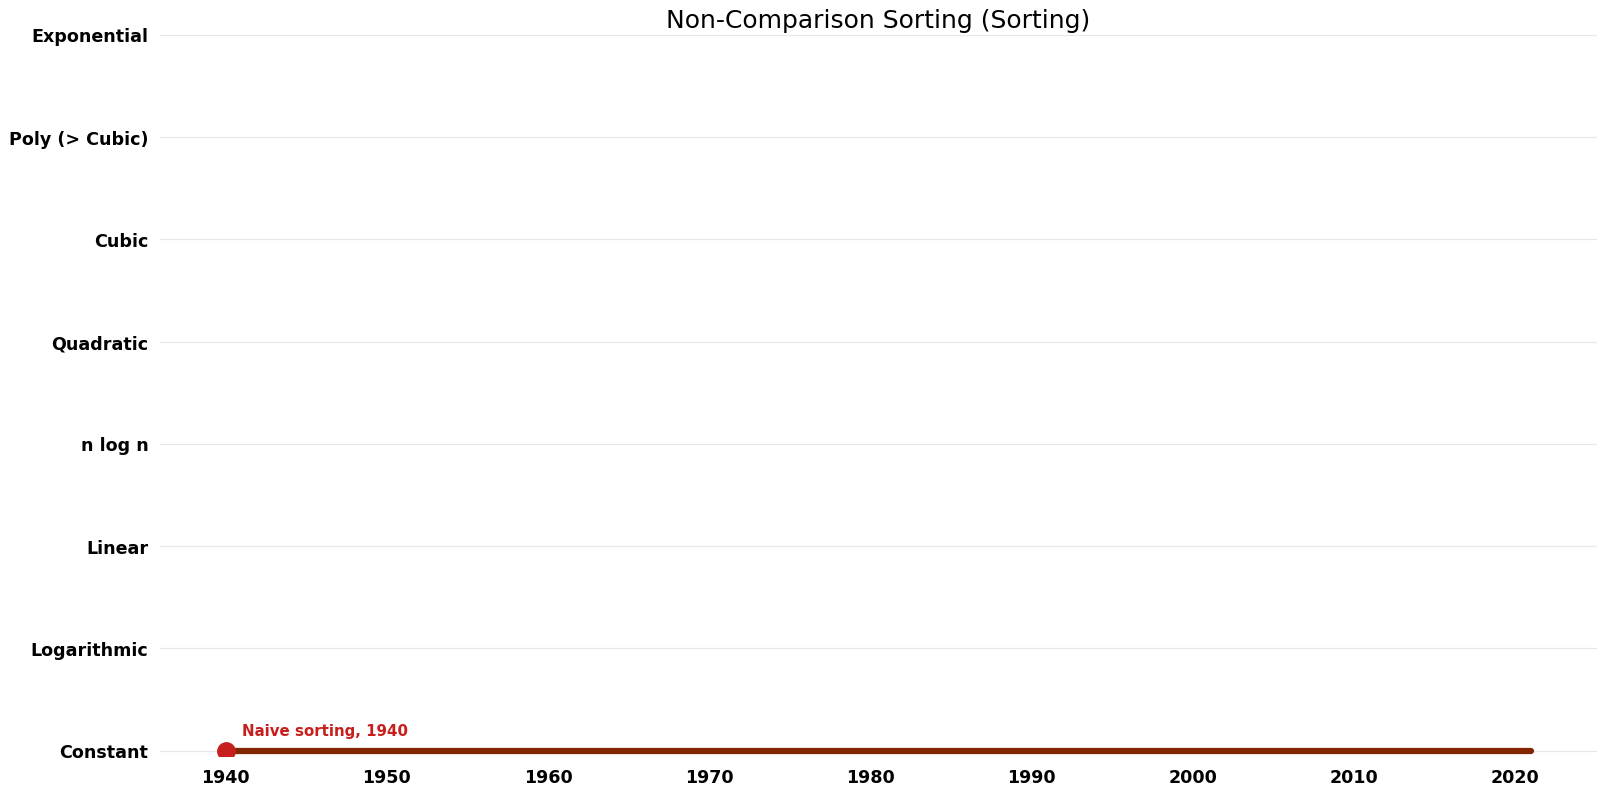 File:Sorting - Non-Comparison Sorting - Space.png